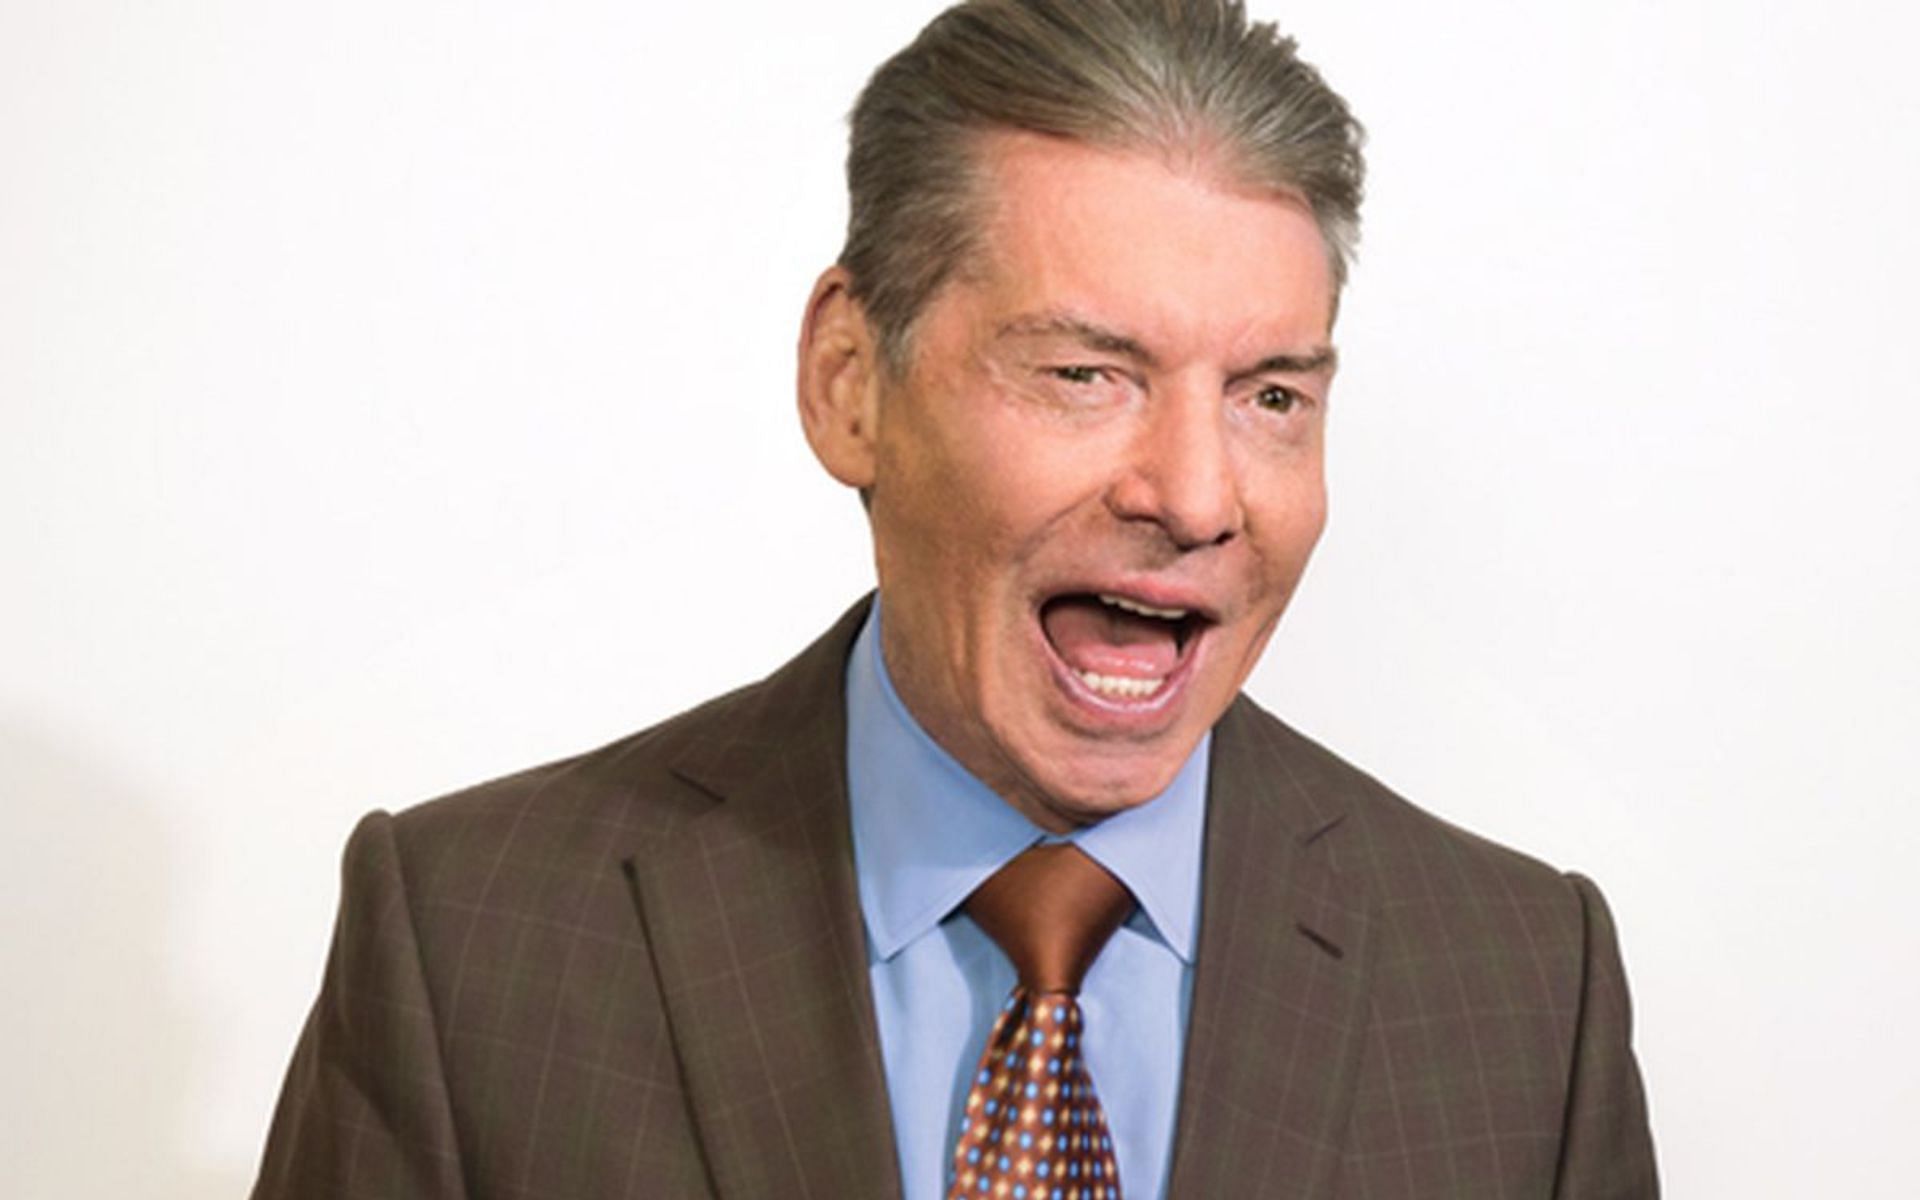 WWE fans are waiting to hear about Vince McMahon